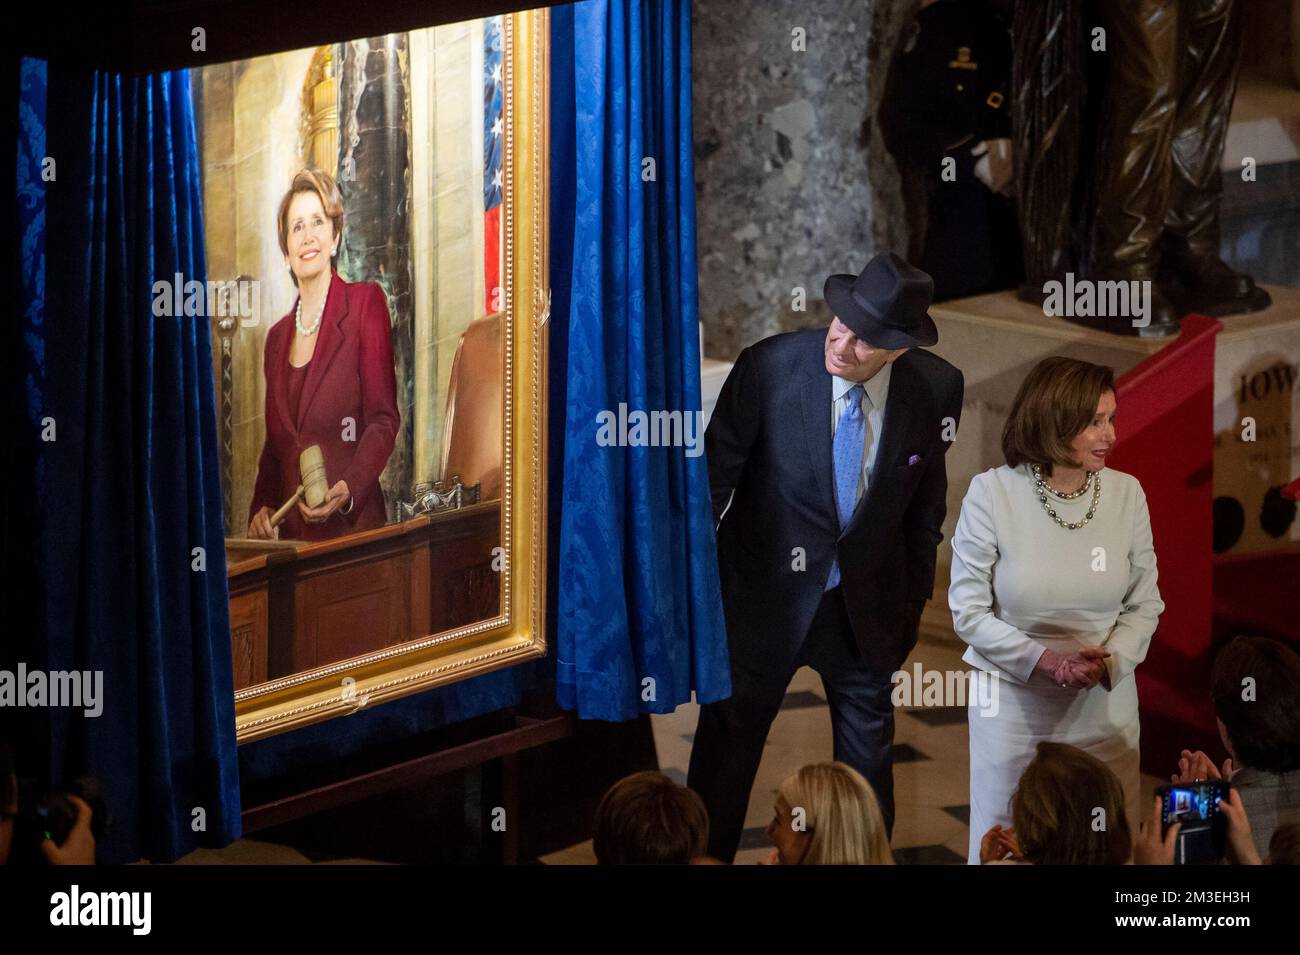 Speaker of the United States House of Representatives Nancy Pelosi (Democrat of California) is joined by her husband Paul Pelosi during a ceremony to unveil her official portrait in Statuary Hall at the US Capitol in Washington, DC, USA, Wednesday, December 14, 2022. Photo by Rod Lamkey/CNP/ABACAPRESS.COM Stock Photo